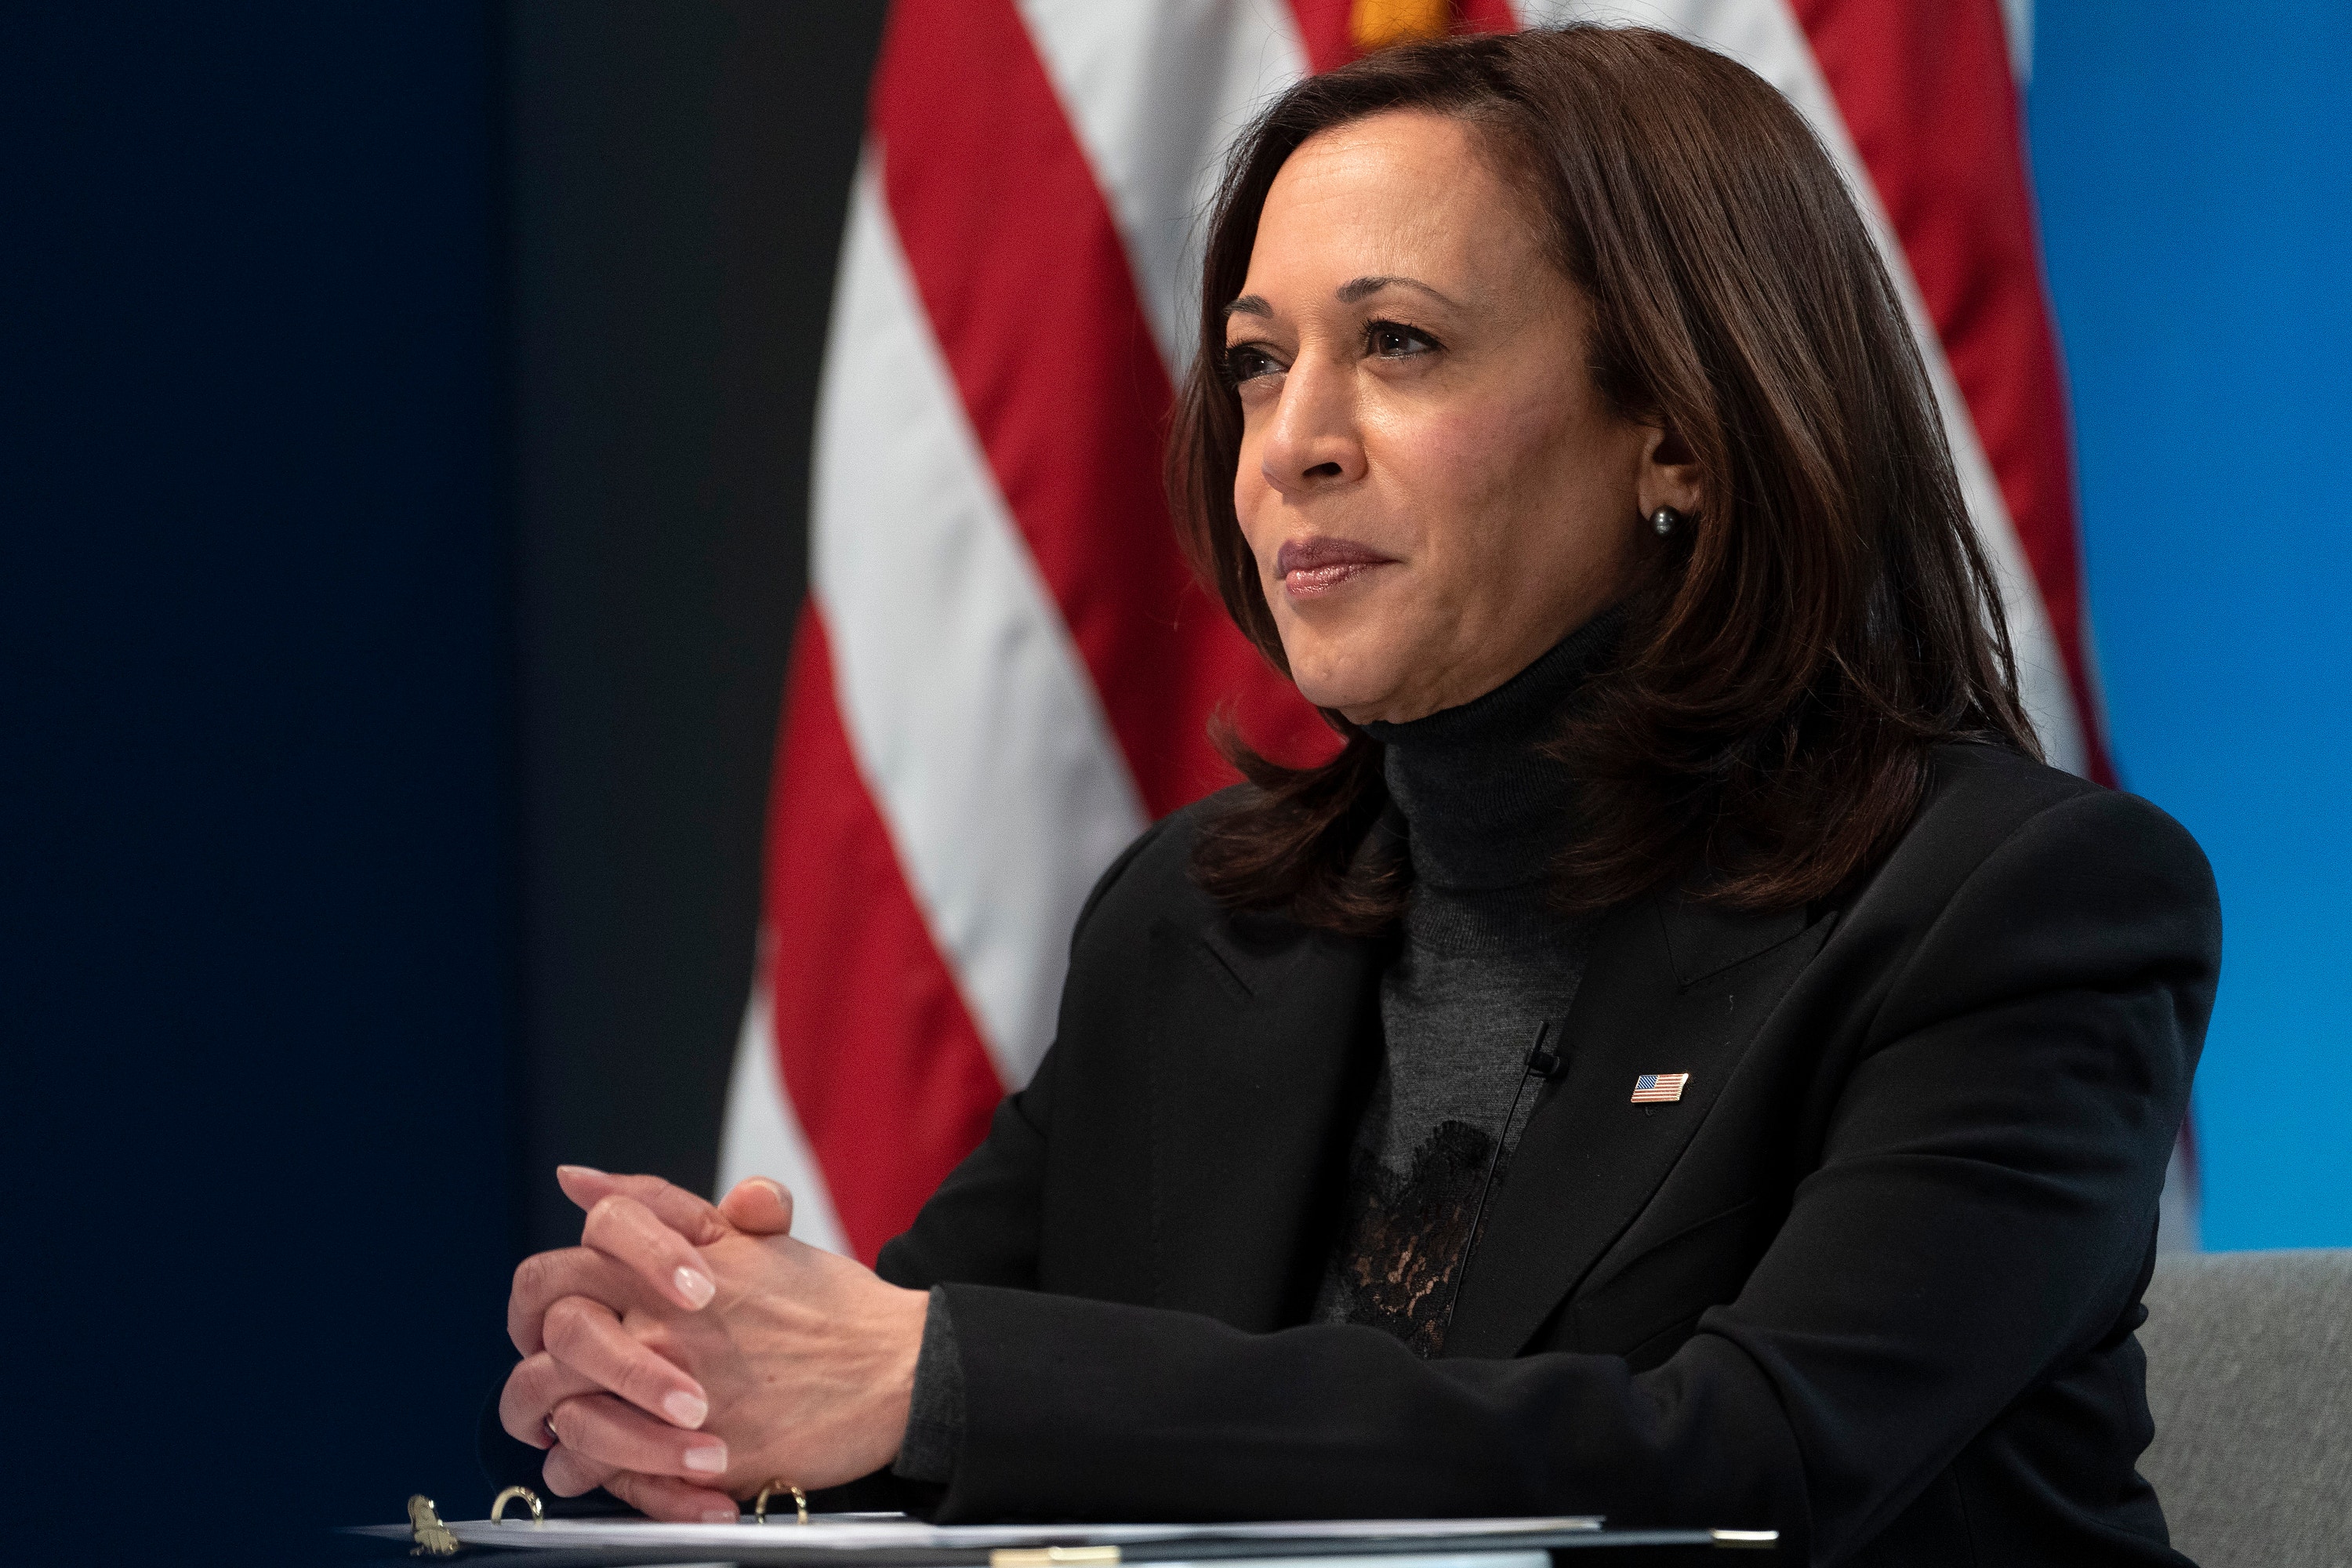 Harris to lead National Space Council amid criticism over lack of border visit